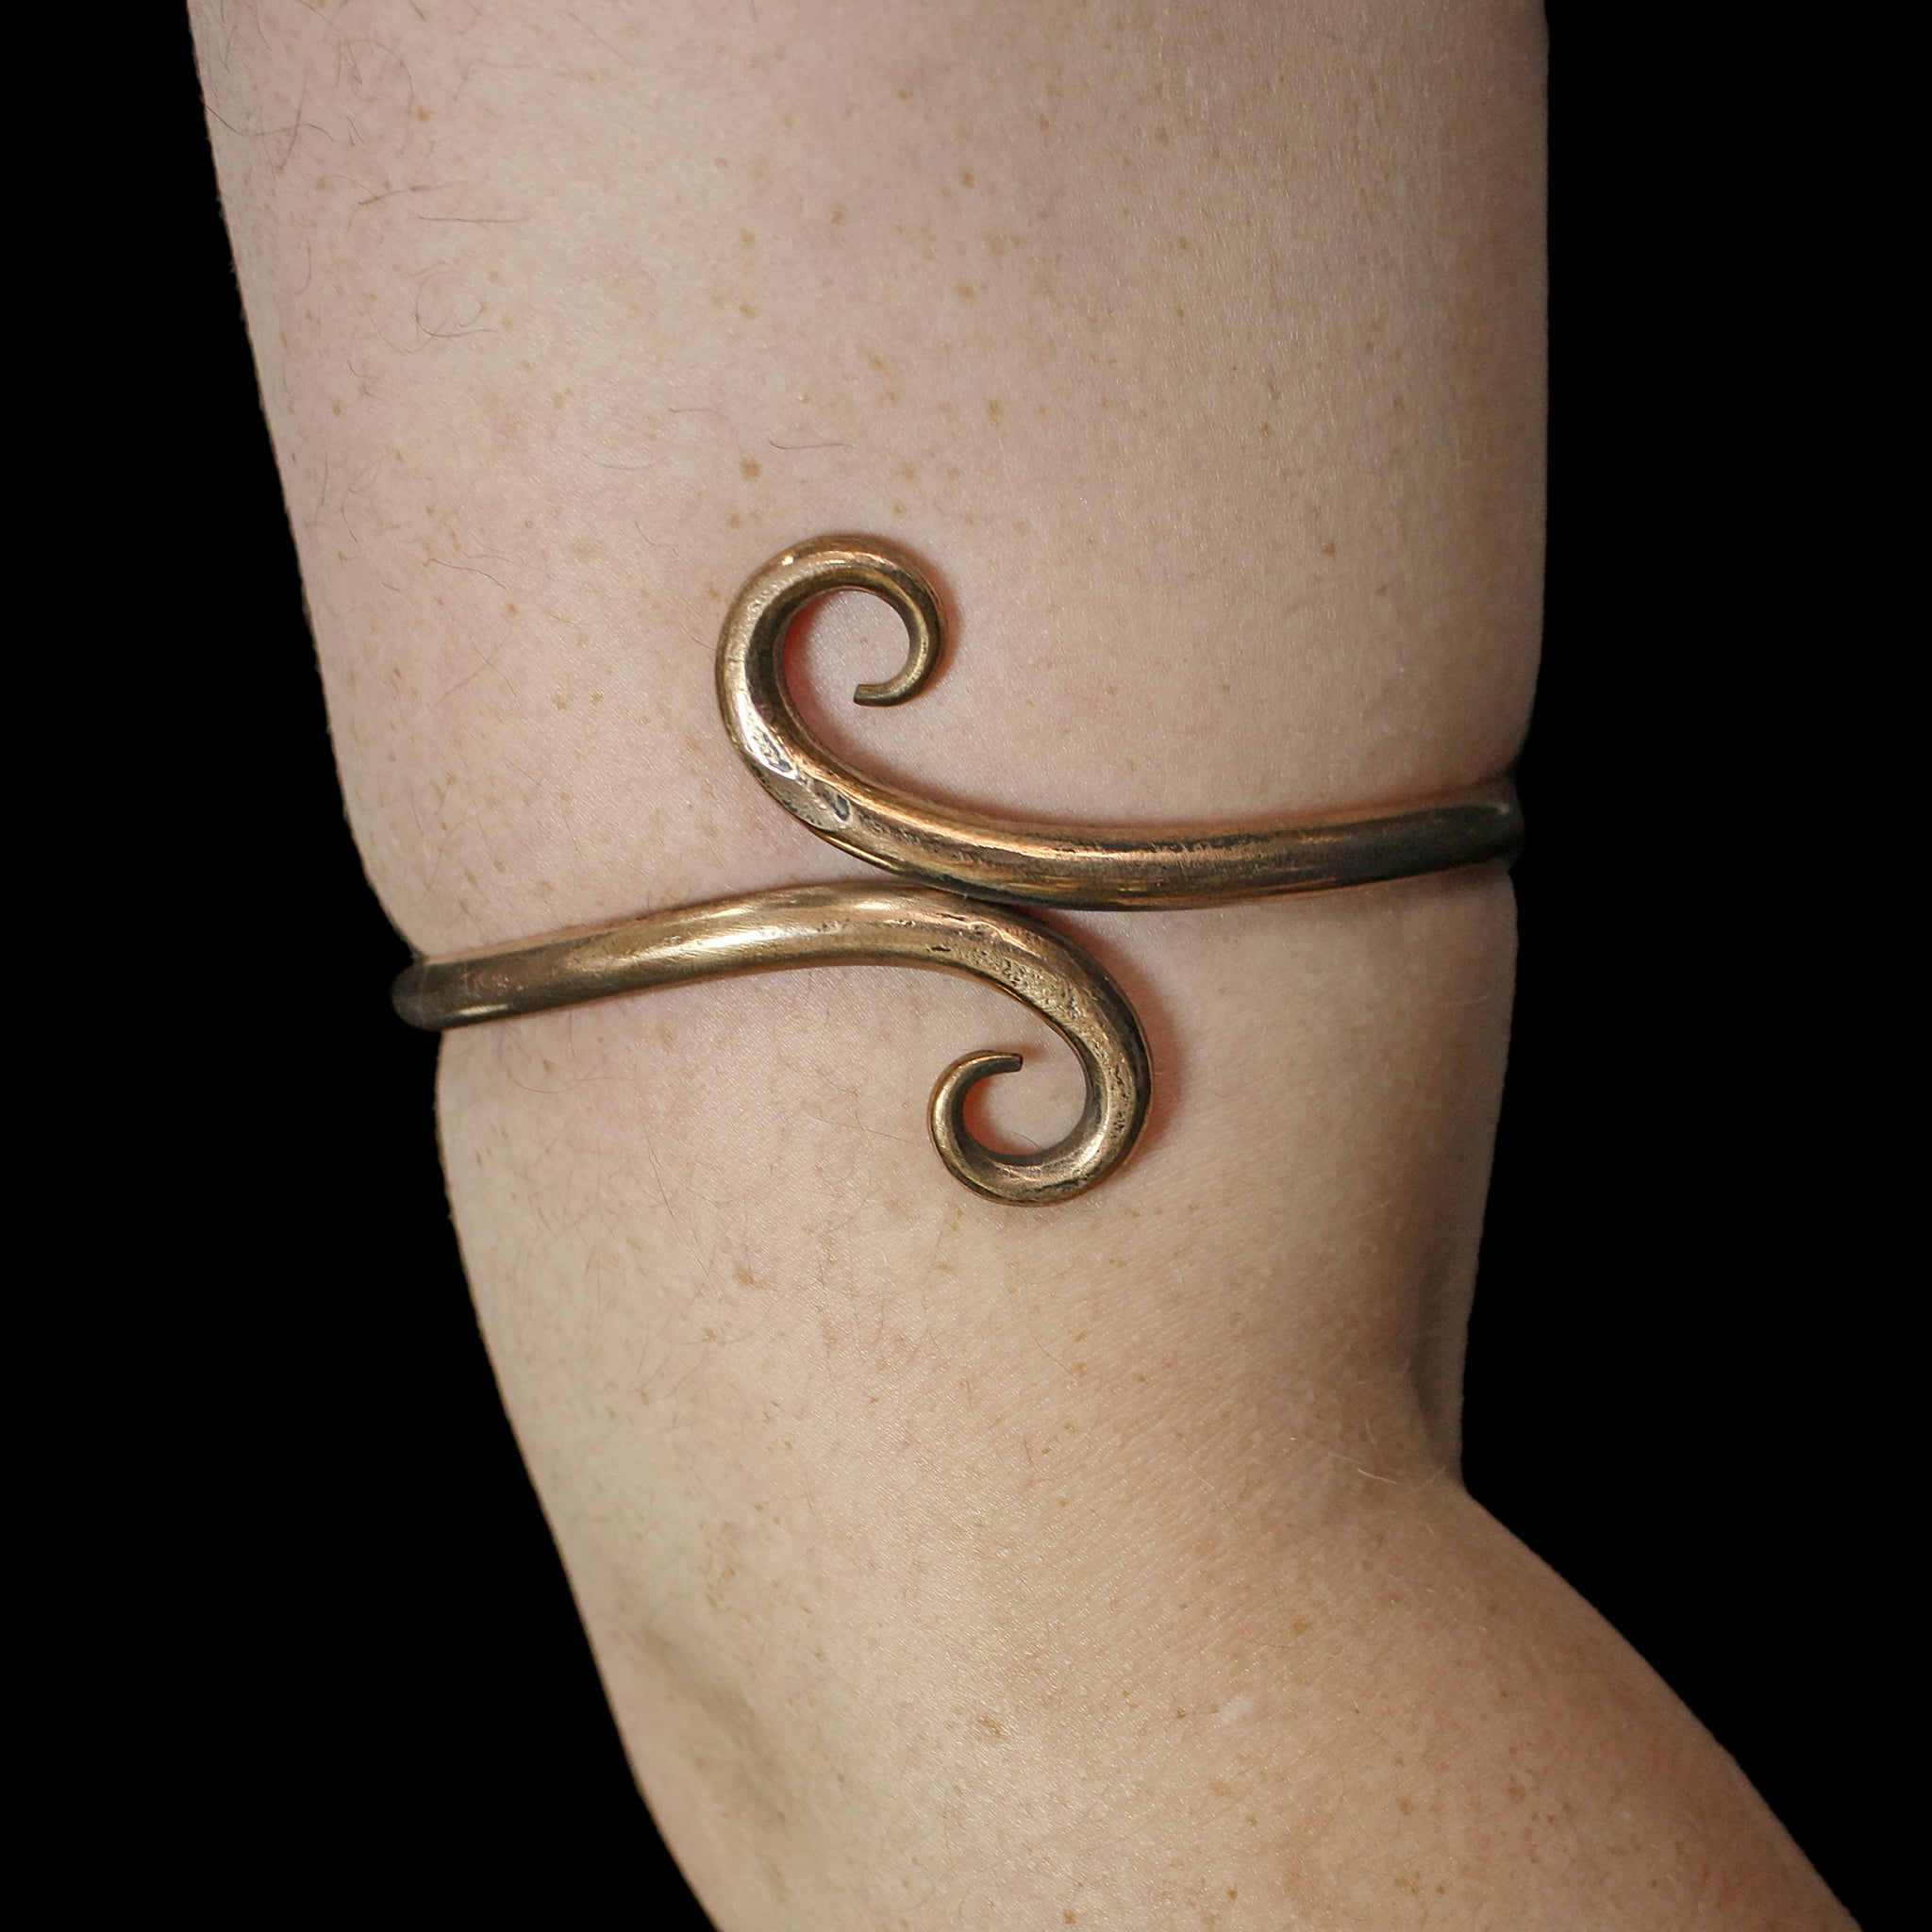 Replica Viking Arm Ring / Arm Band / Torc in Solid Bronze on Arm